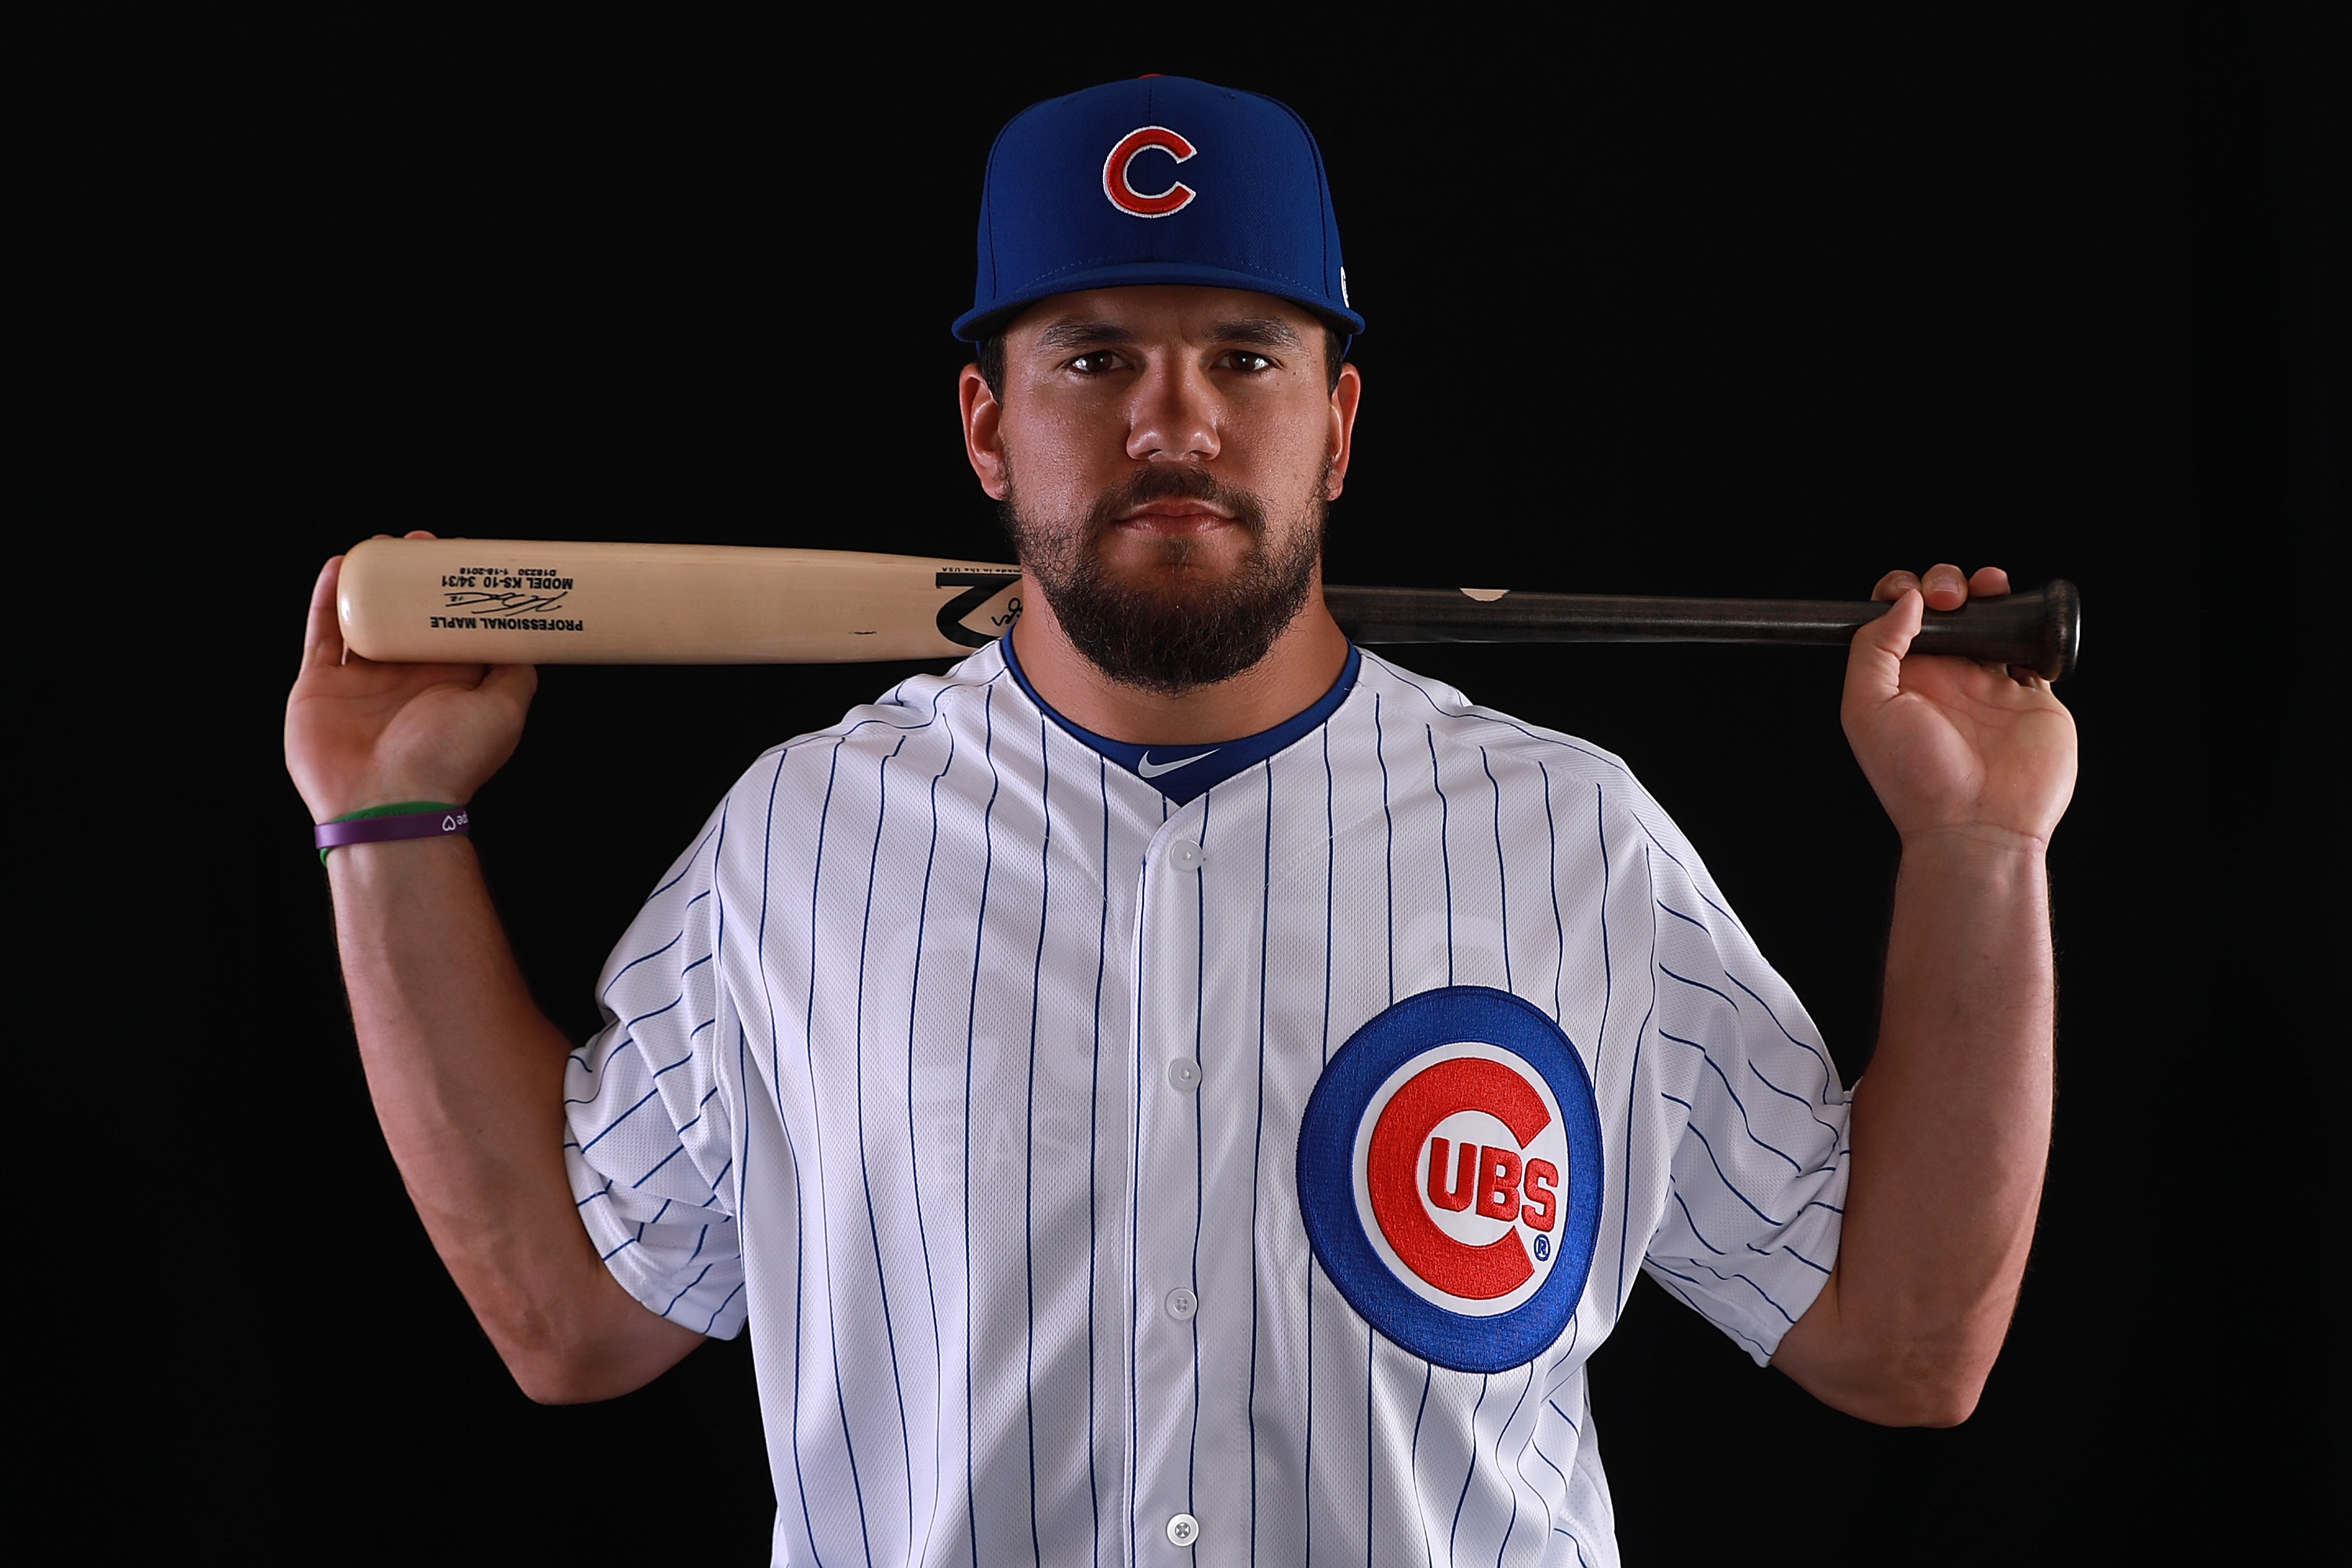 Cubs star Kyle Schwarber looks much slimmer this offseason